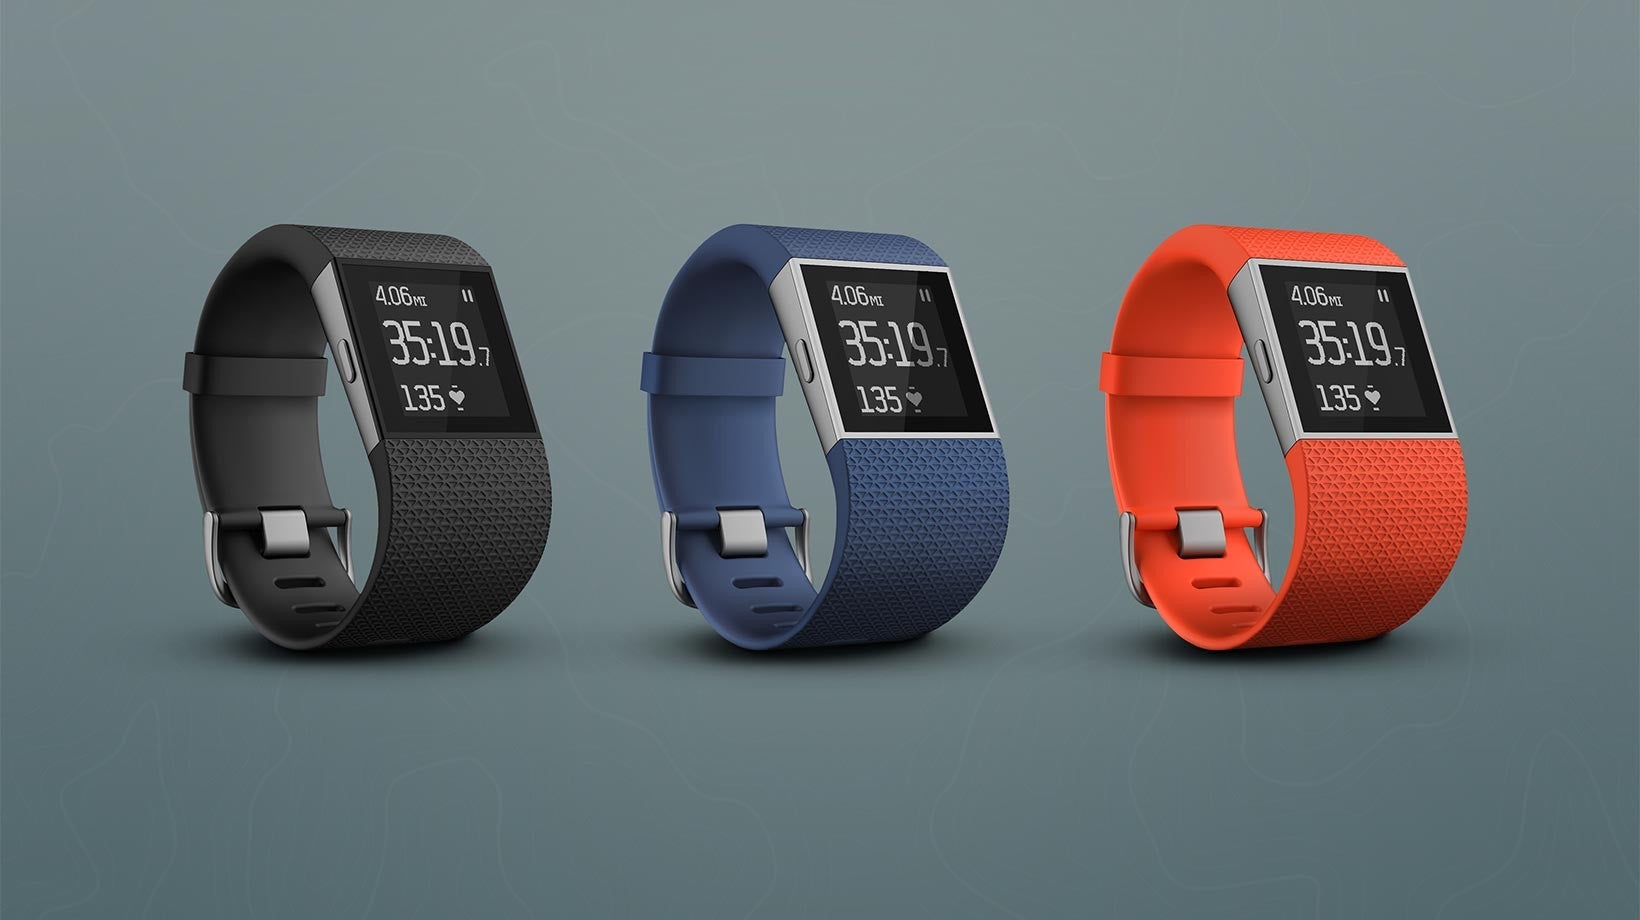 Fitbit Surge - Fitbit announces new Fitbit Charge HR and Fitbit Surge activity trackers for sports enthusiasts